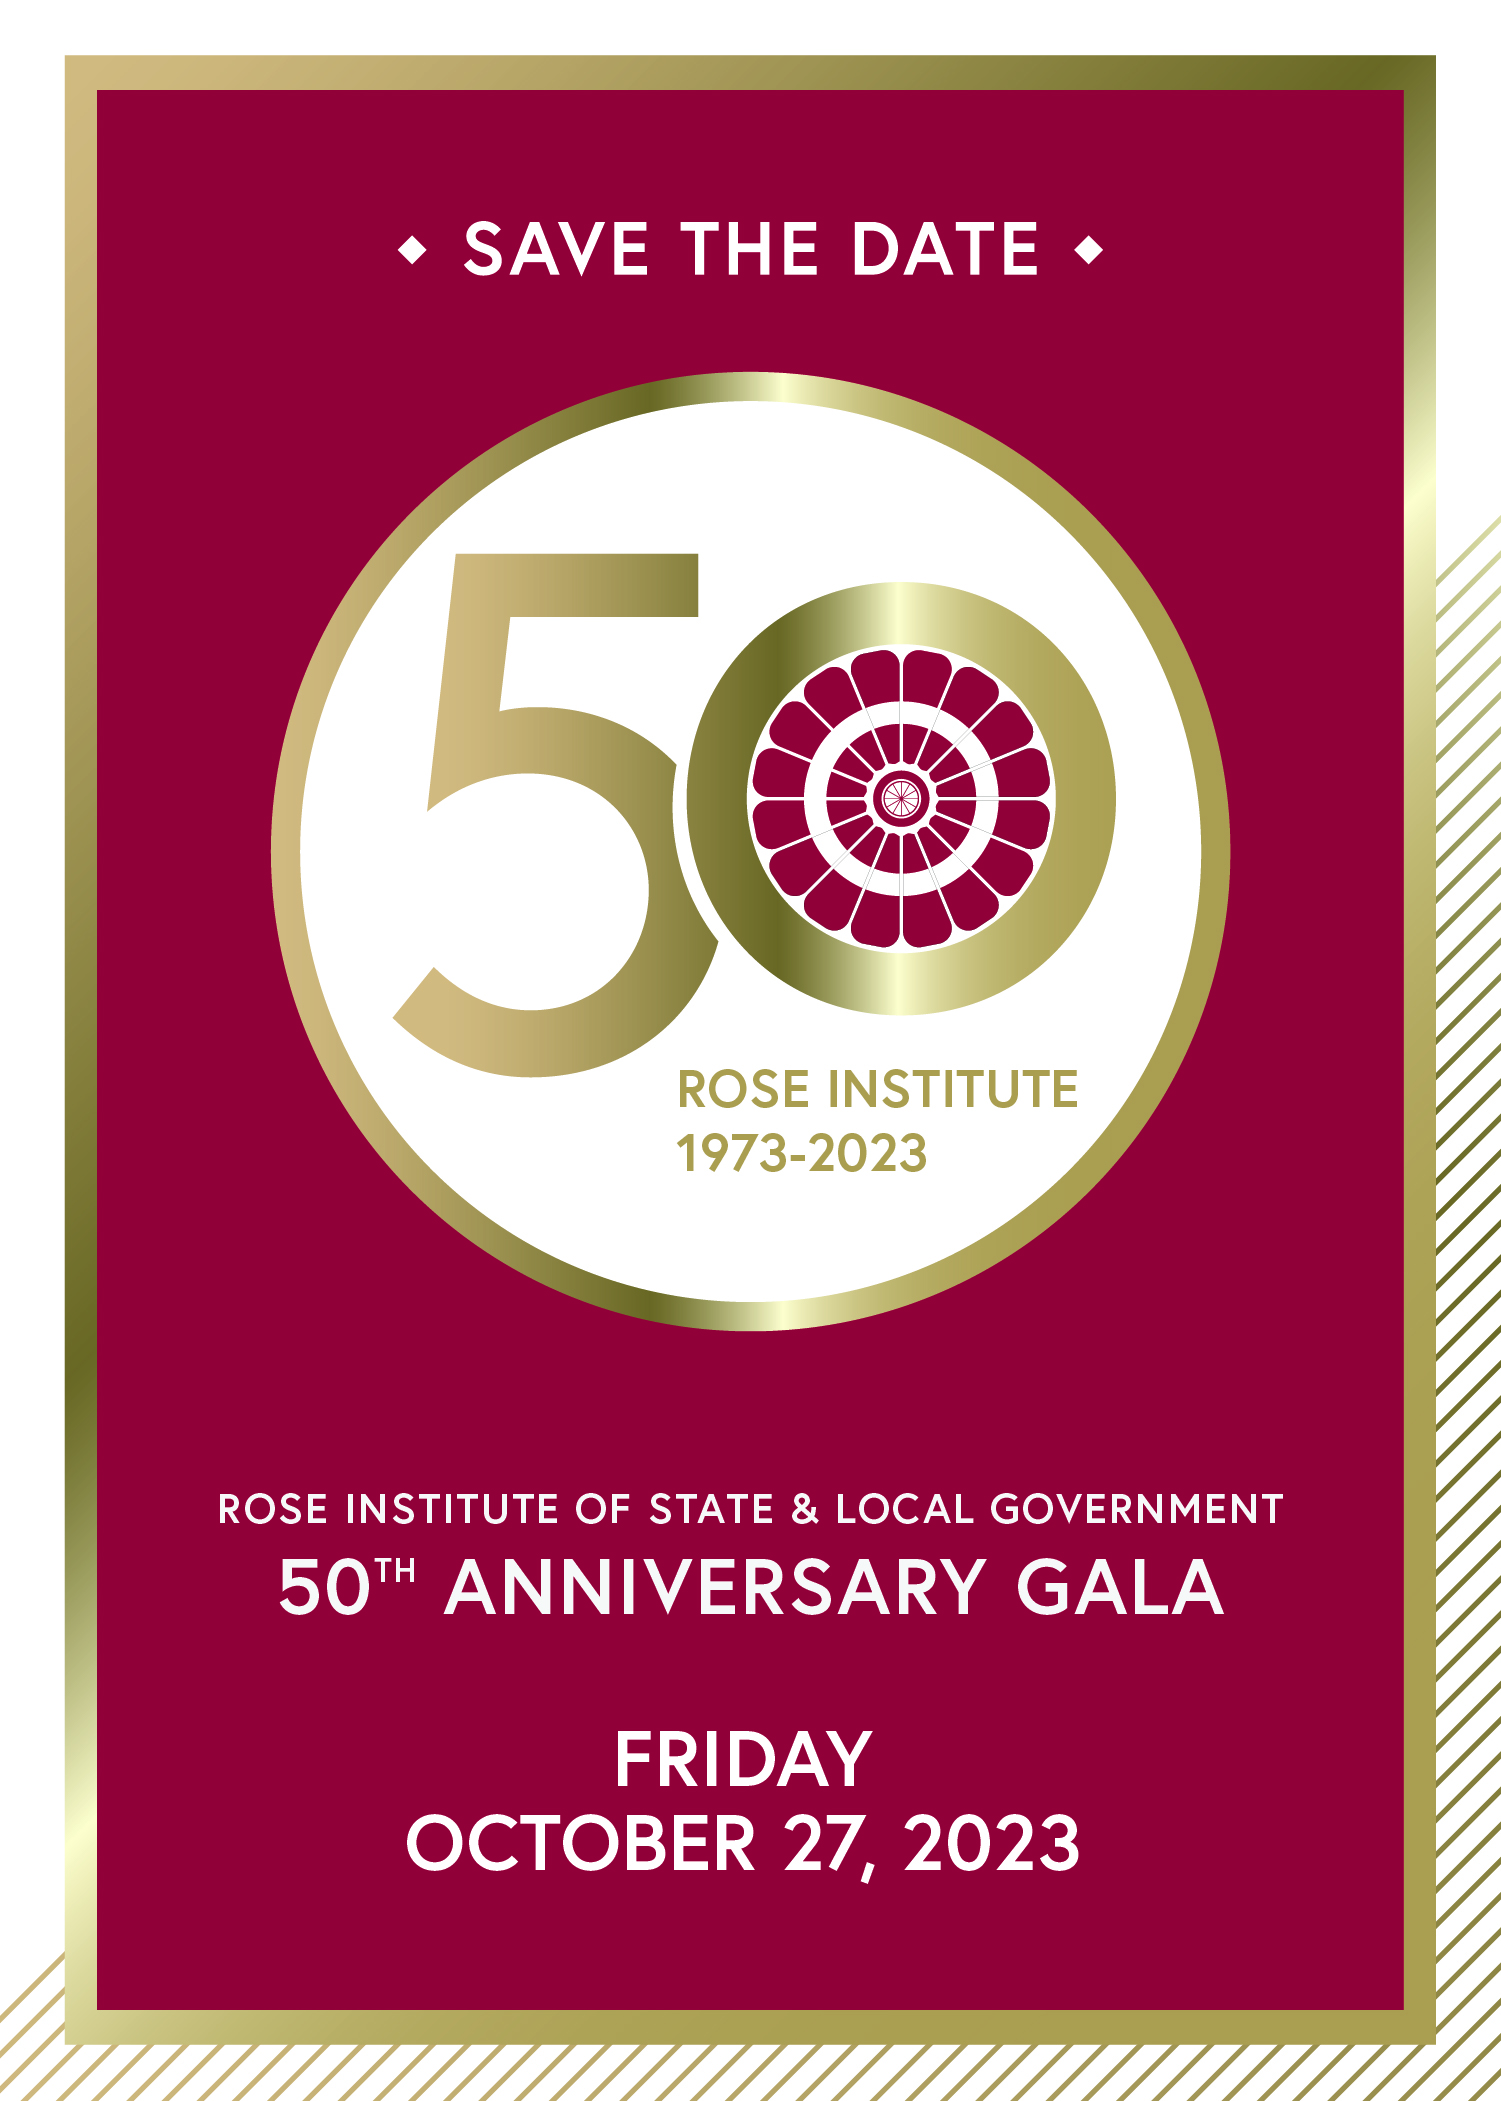 Rose Institute's 50th Anniversary Gala. Friday, October 27, 2023.